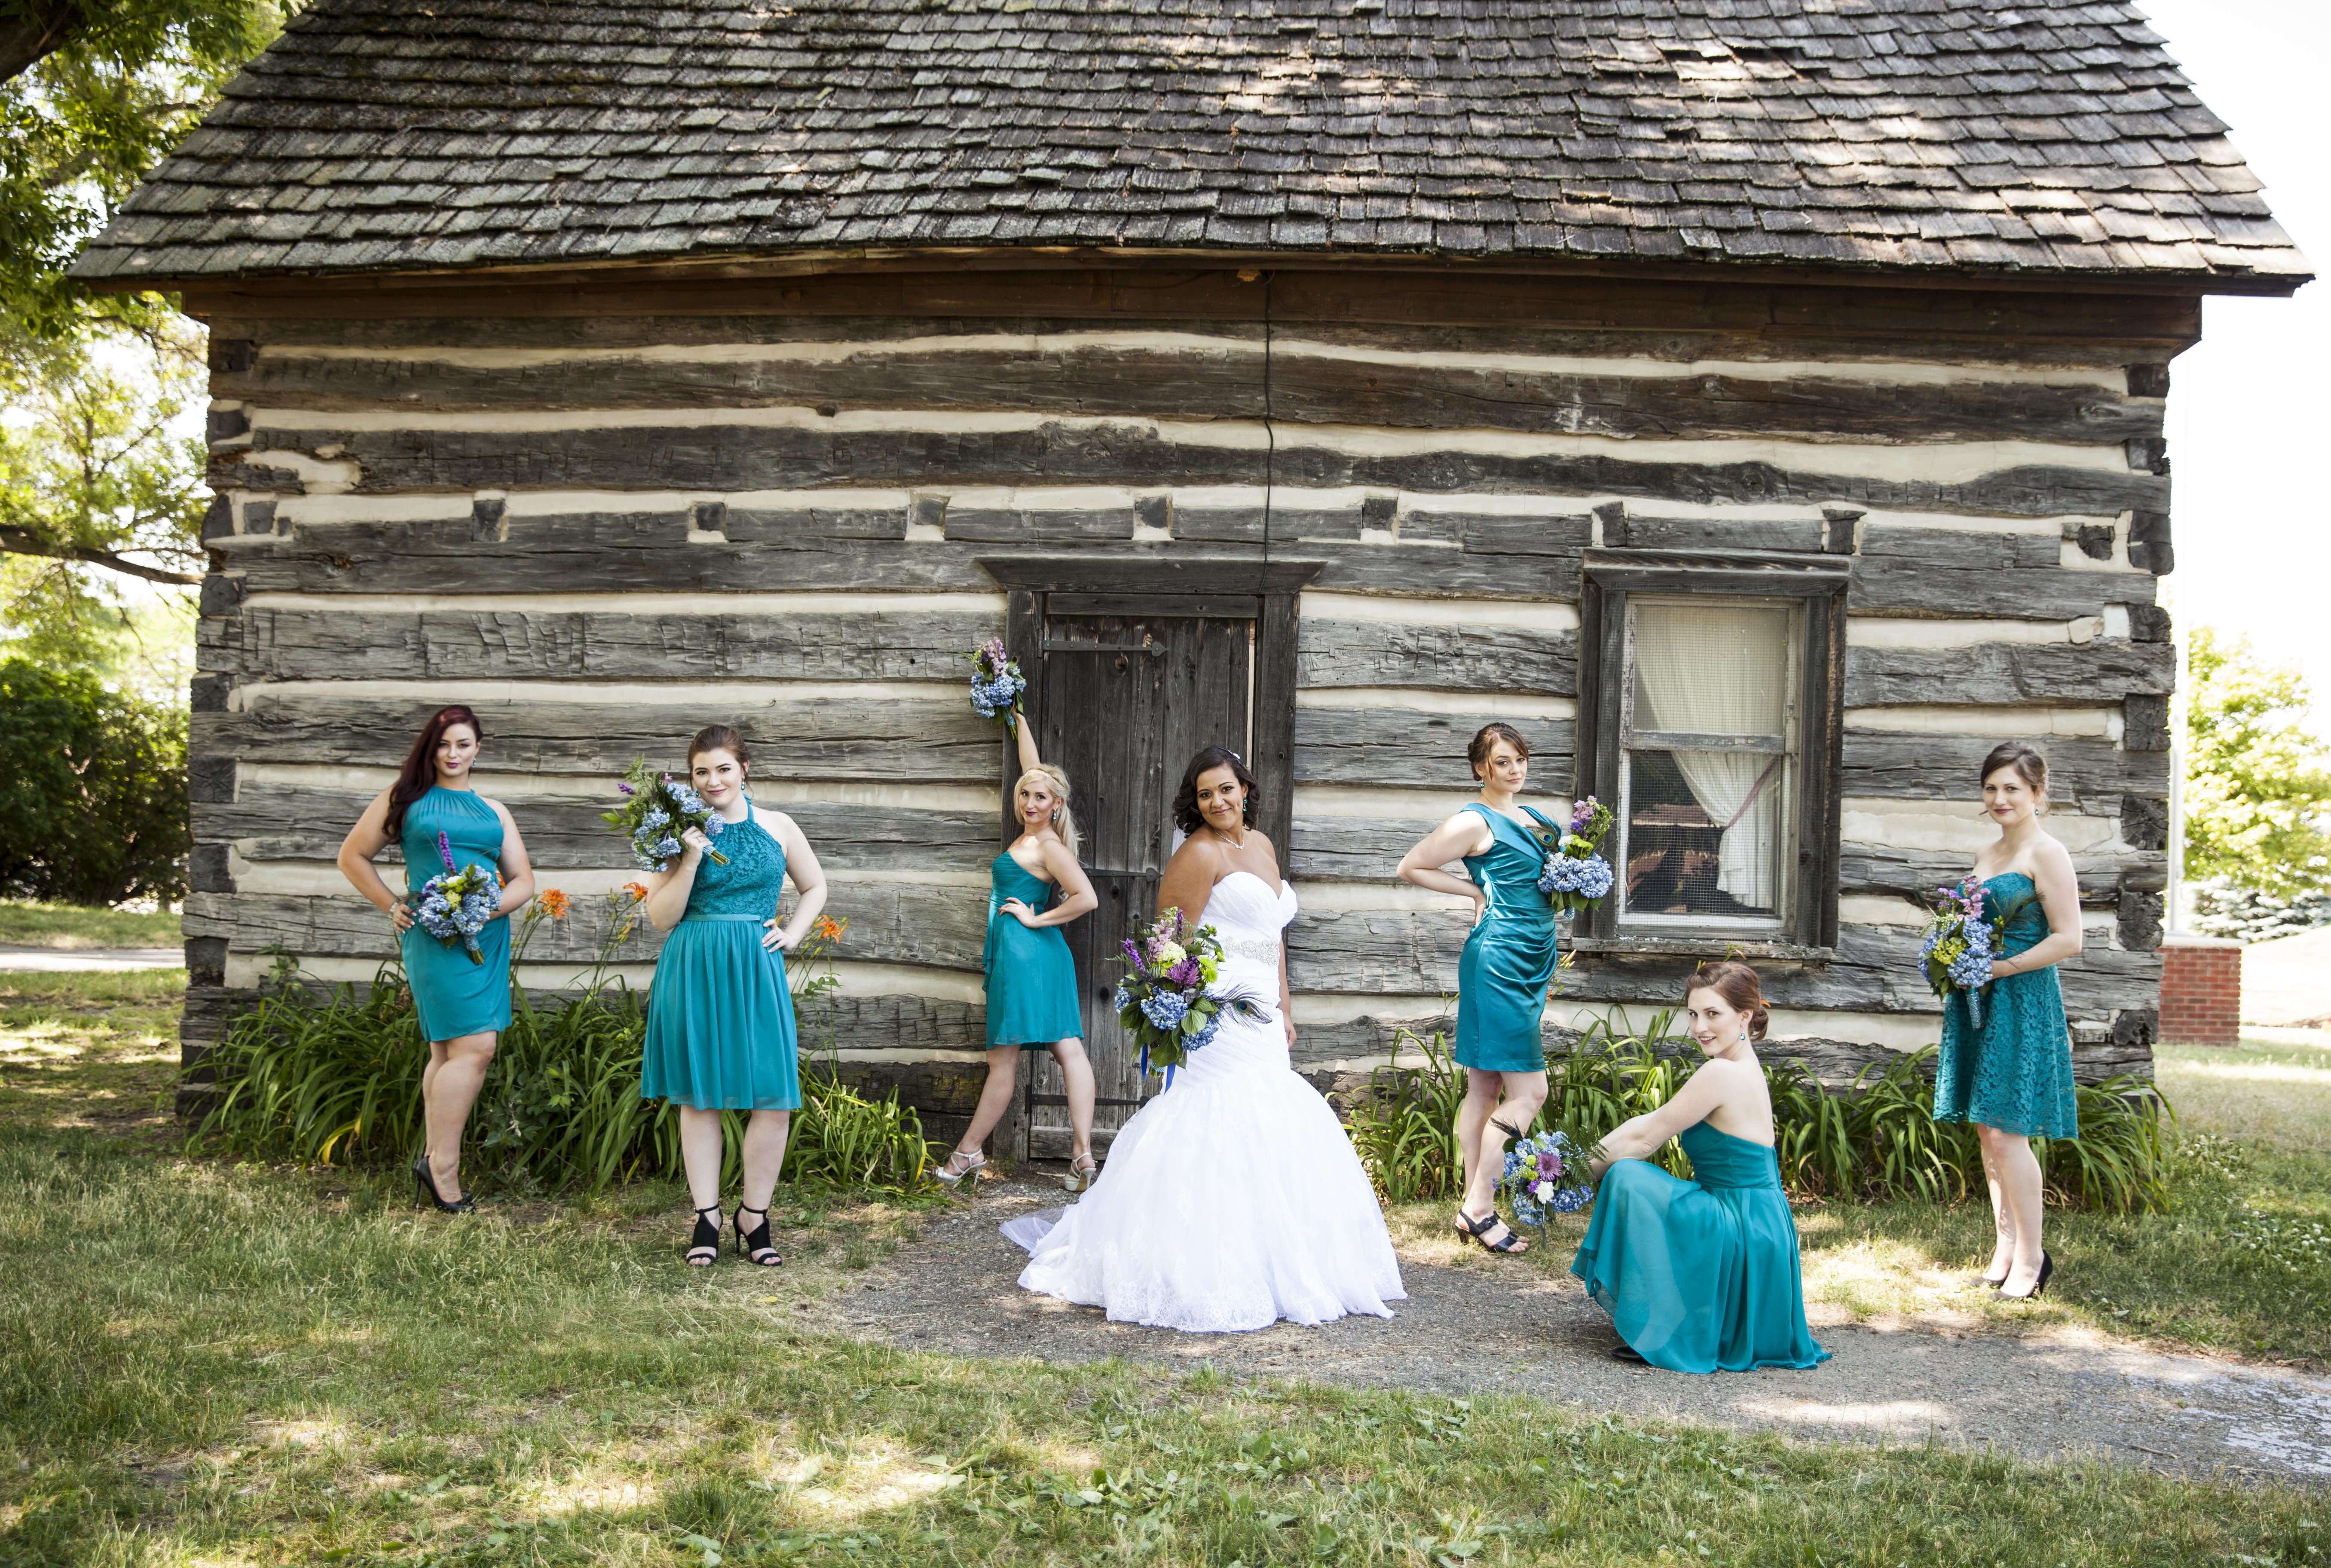 the bride and bride's maids posing in front of an old cabin